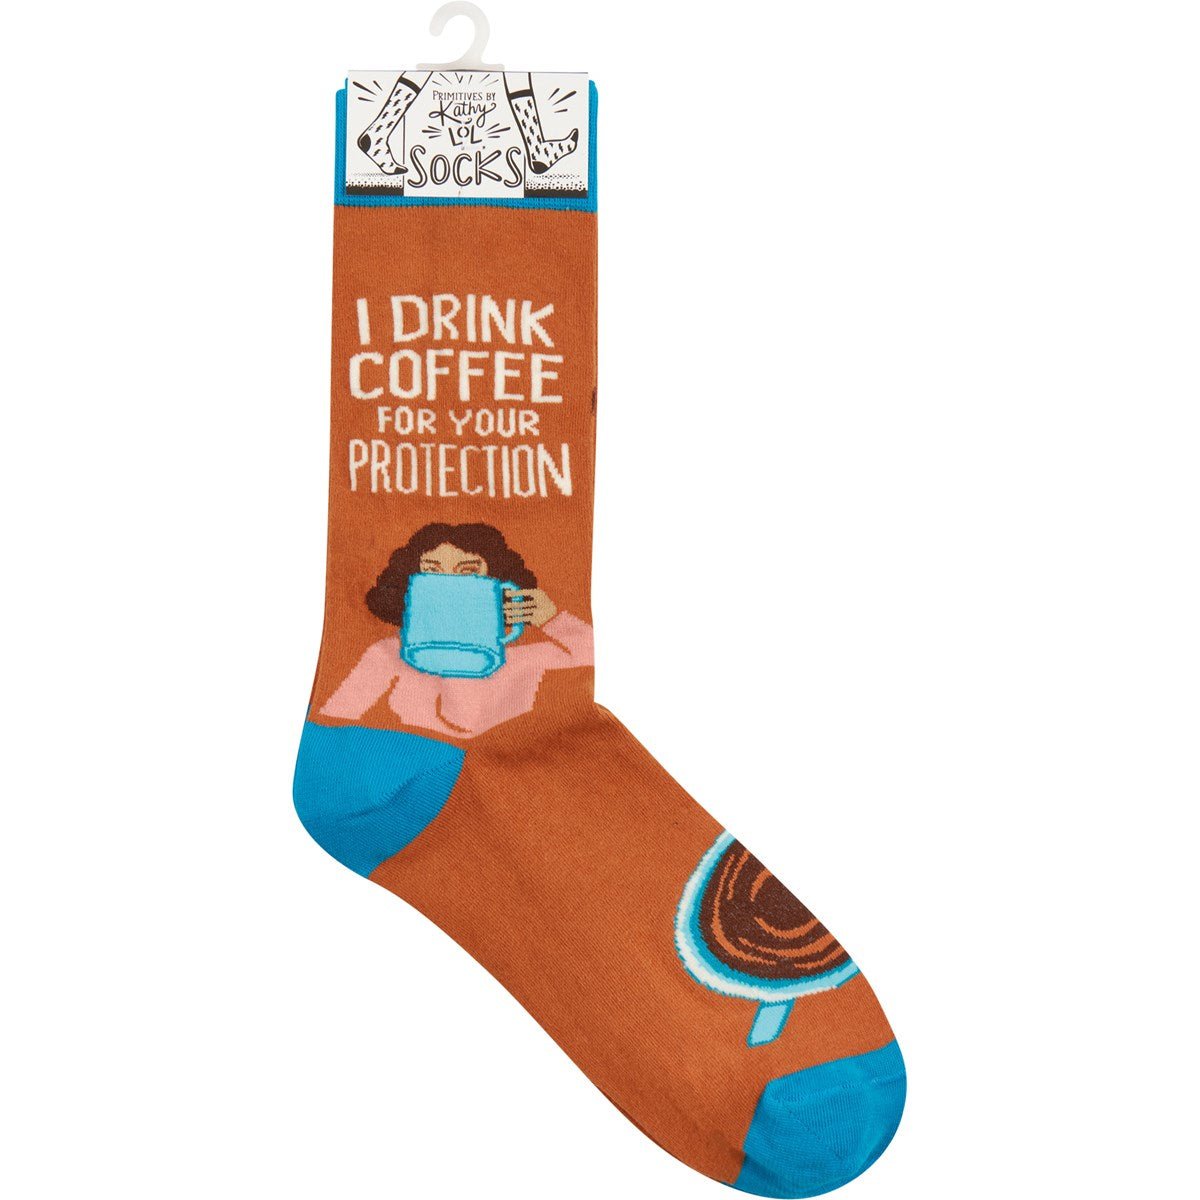 I Drink Coffee For Your Protection Funny Socks in Aqua Blue and Brown | Unisex